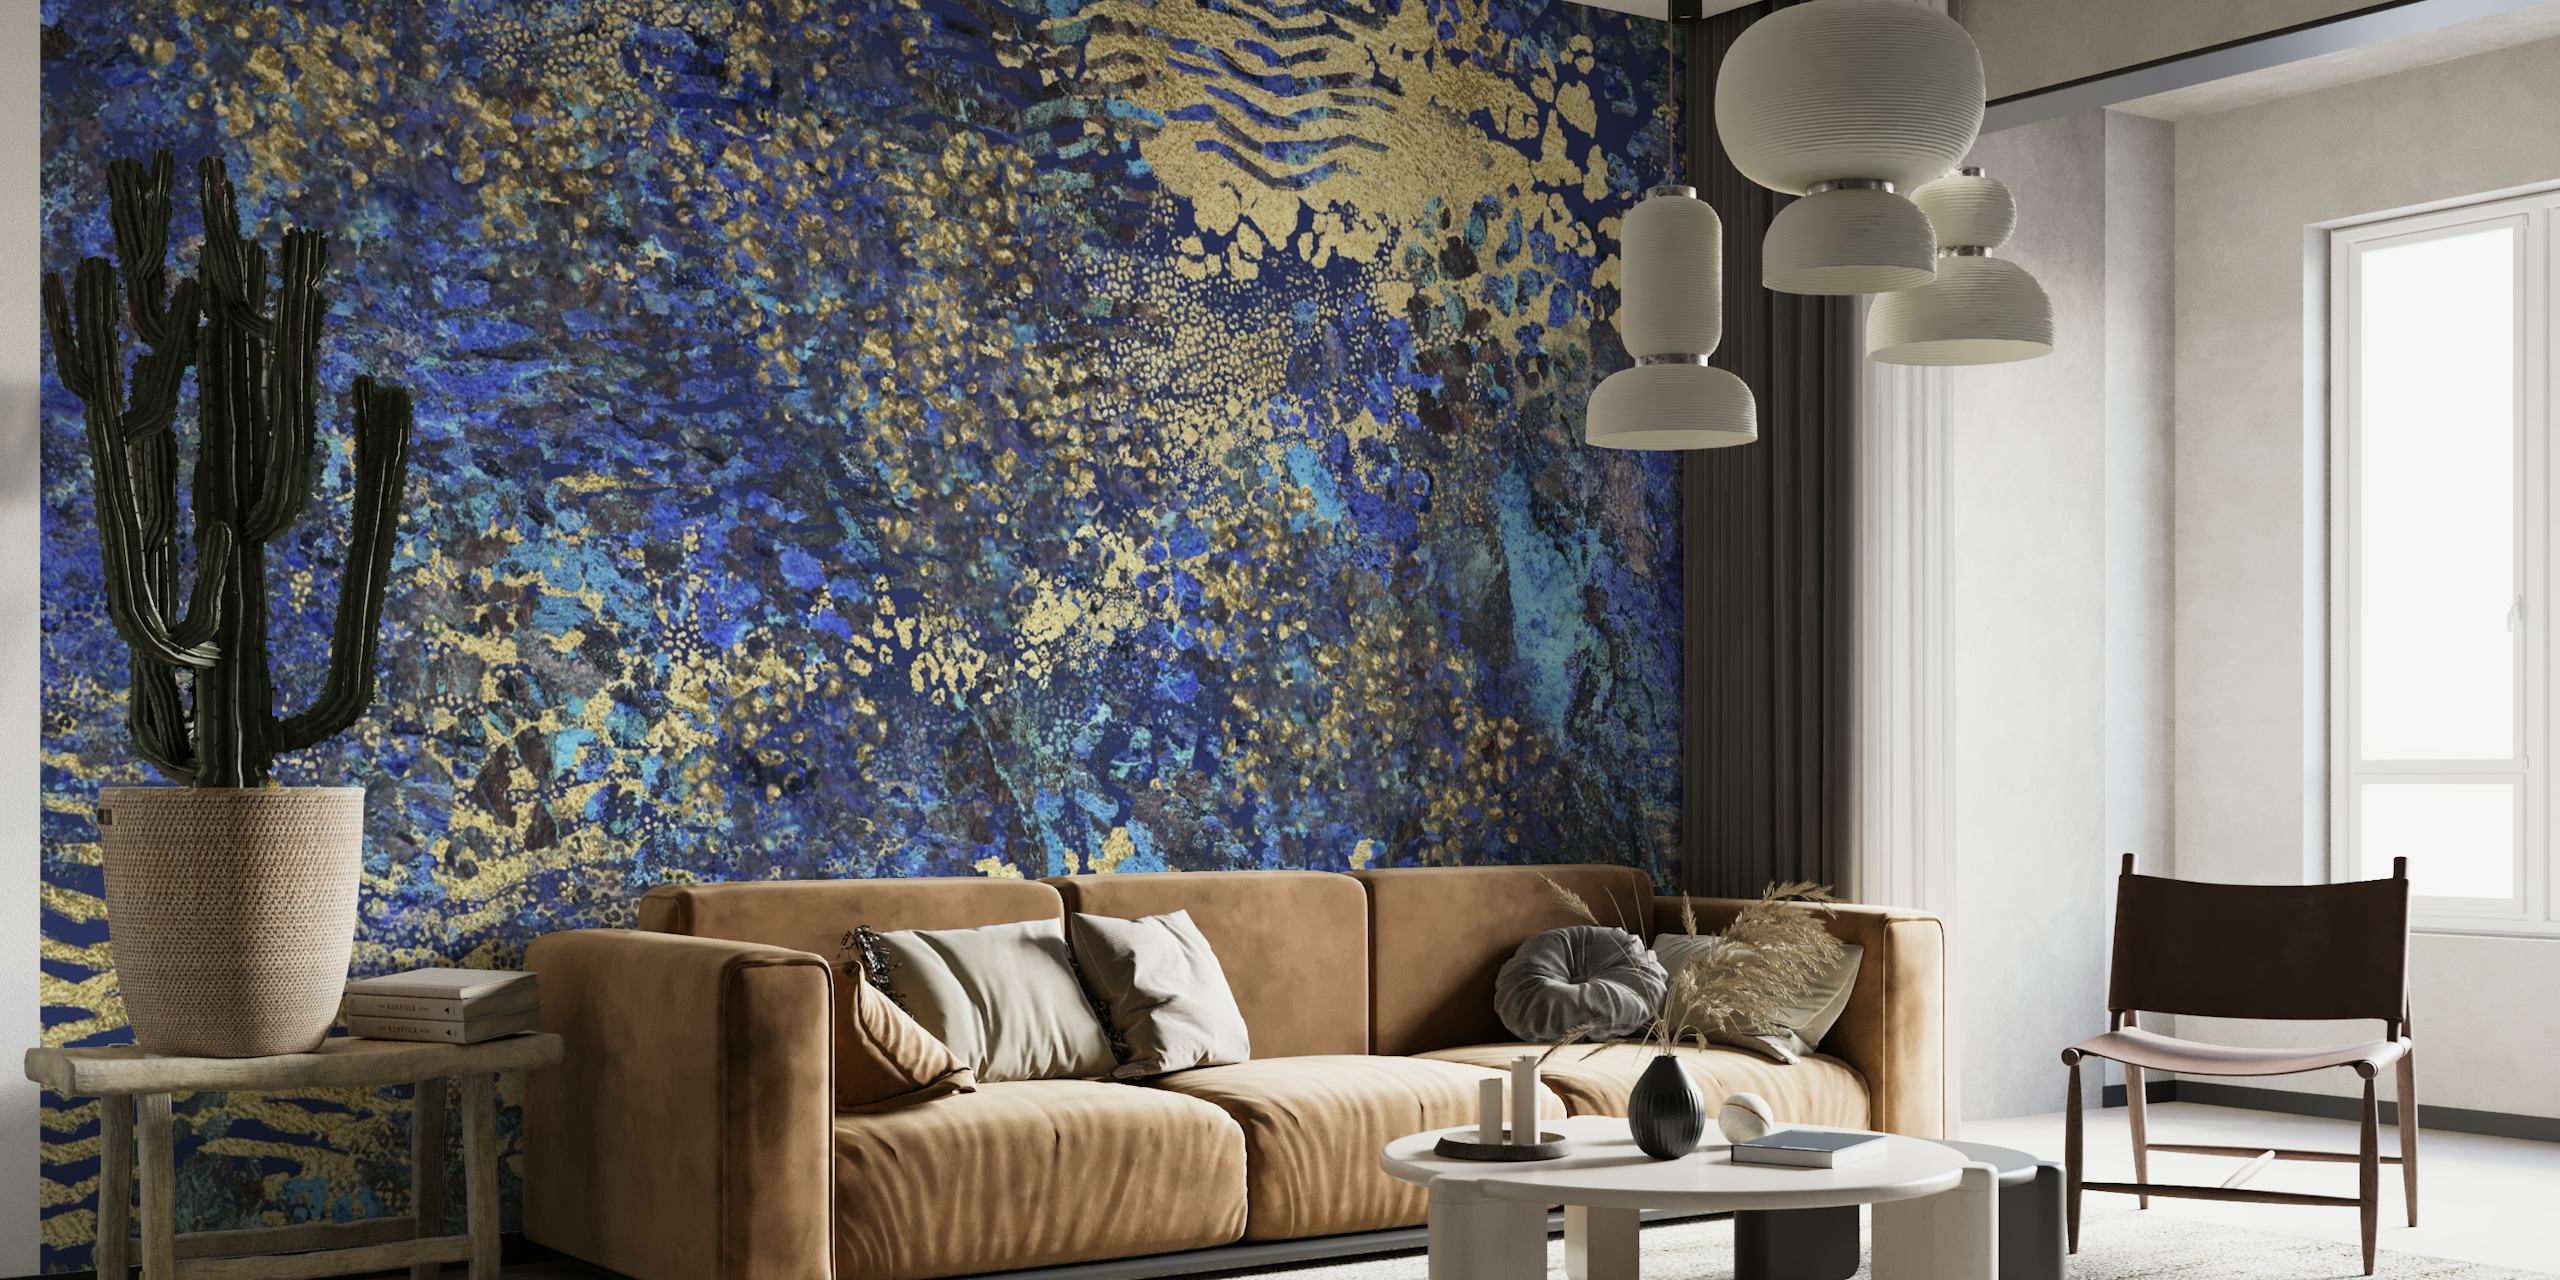 Luxurious Blue and Gold Animal Print Wallpaper Design